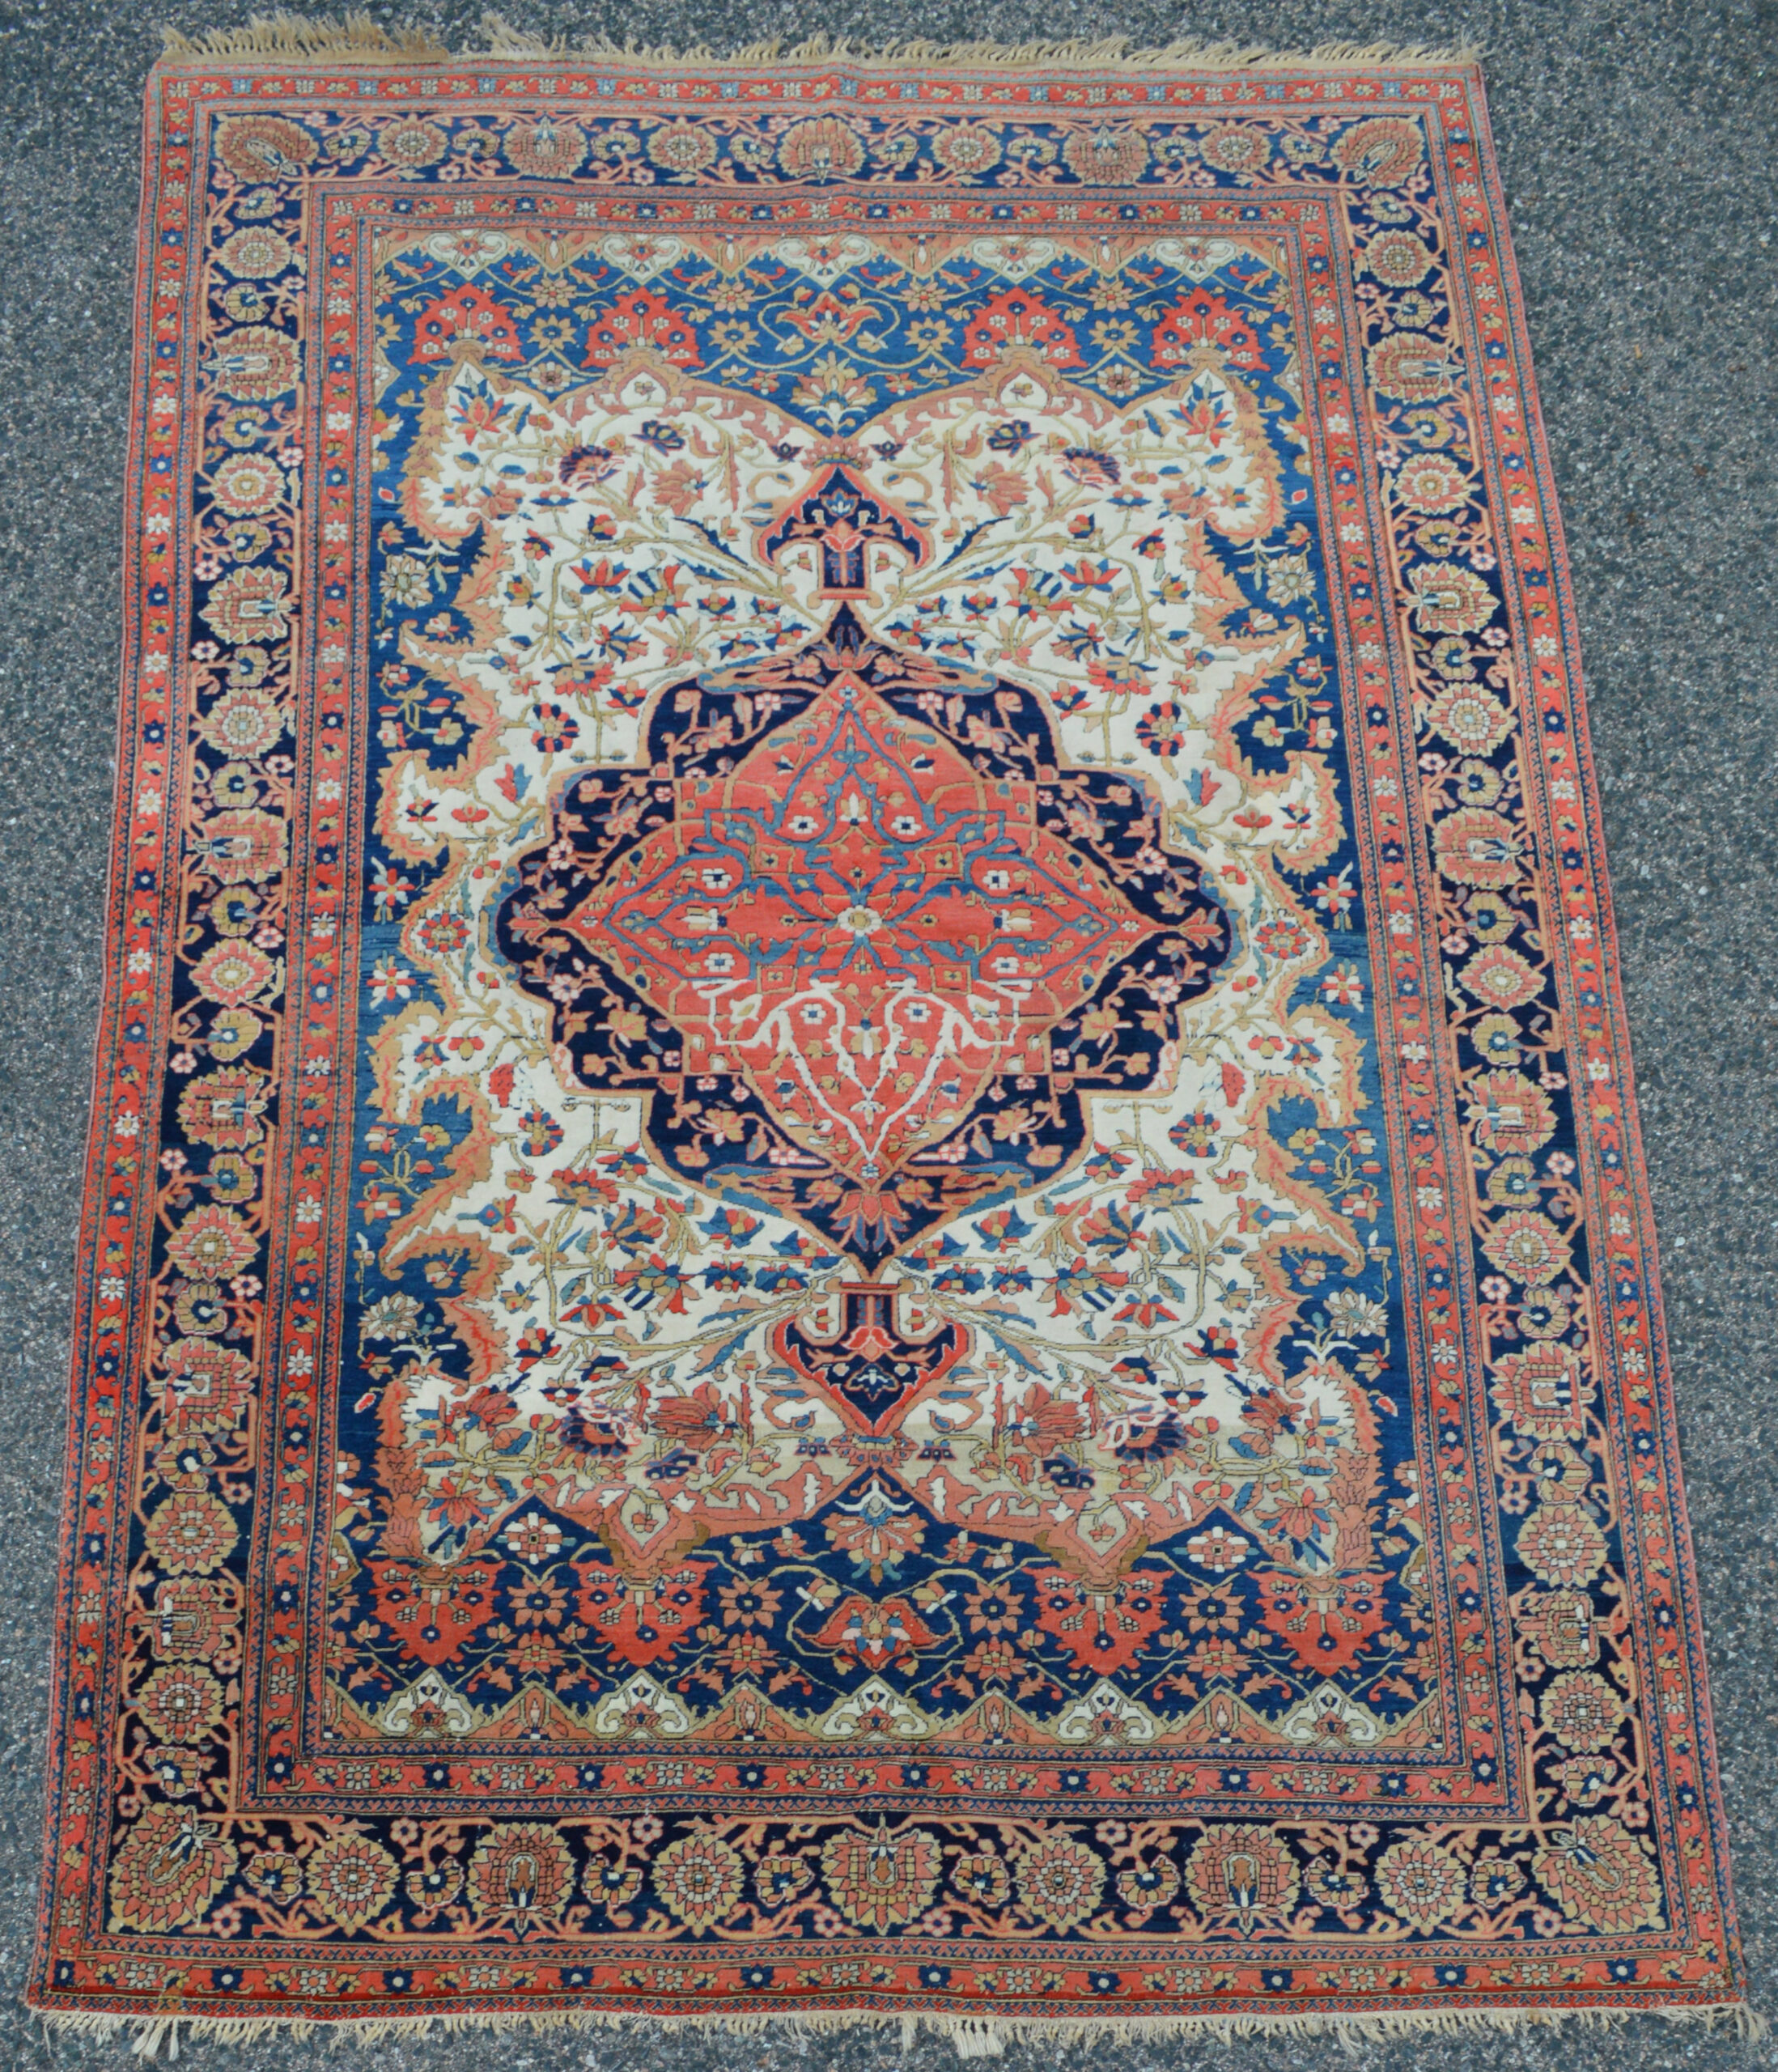 Boston,MA area based Douglas Stock Gallery specializes in 19th century antique Persian Mohtasham Kashan rugs and room size Mohtasham Kashan carpets. This Mohtasham Kashan rug has a soft red and navy blue medallion on an ivory field that is framed by mid blue trim and a navy blue border, circa 1880.